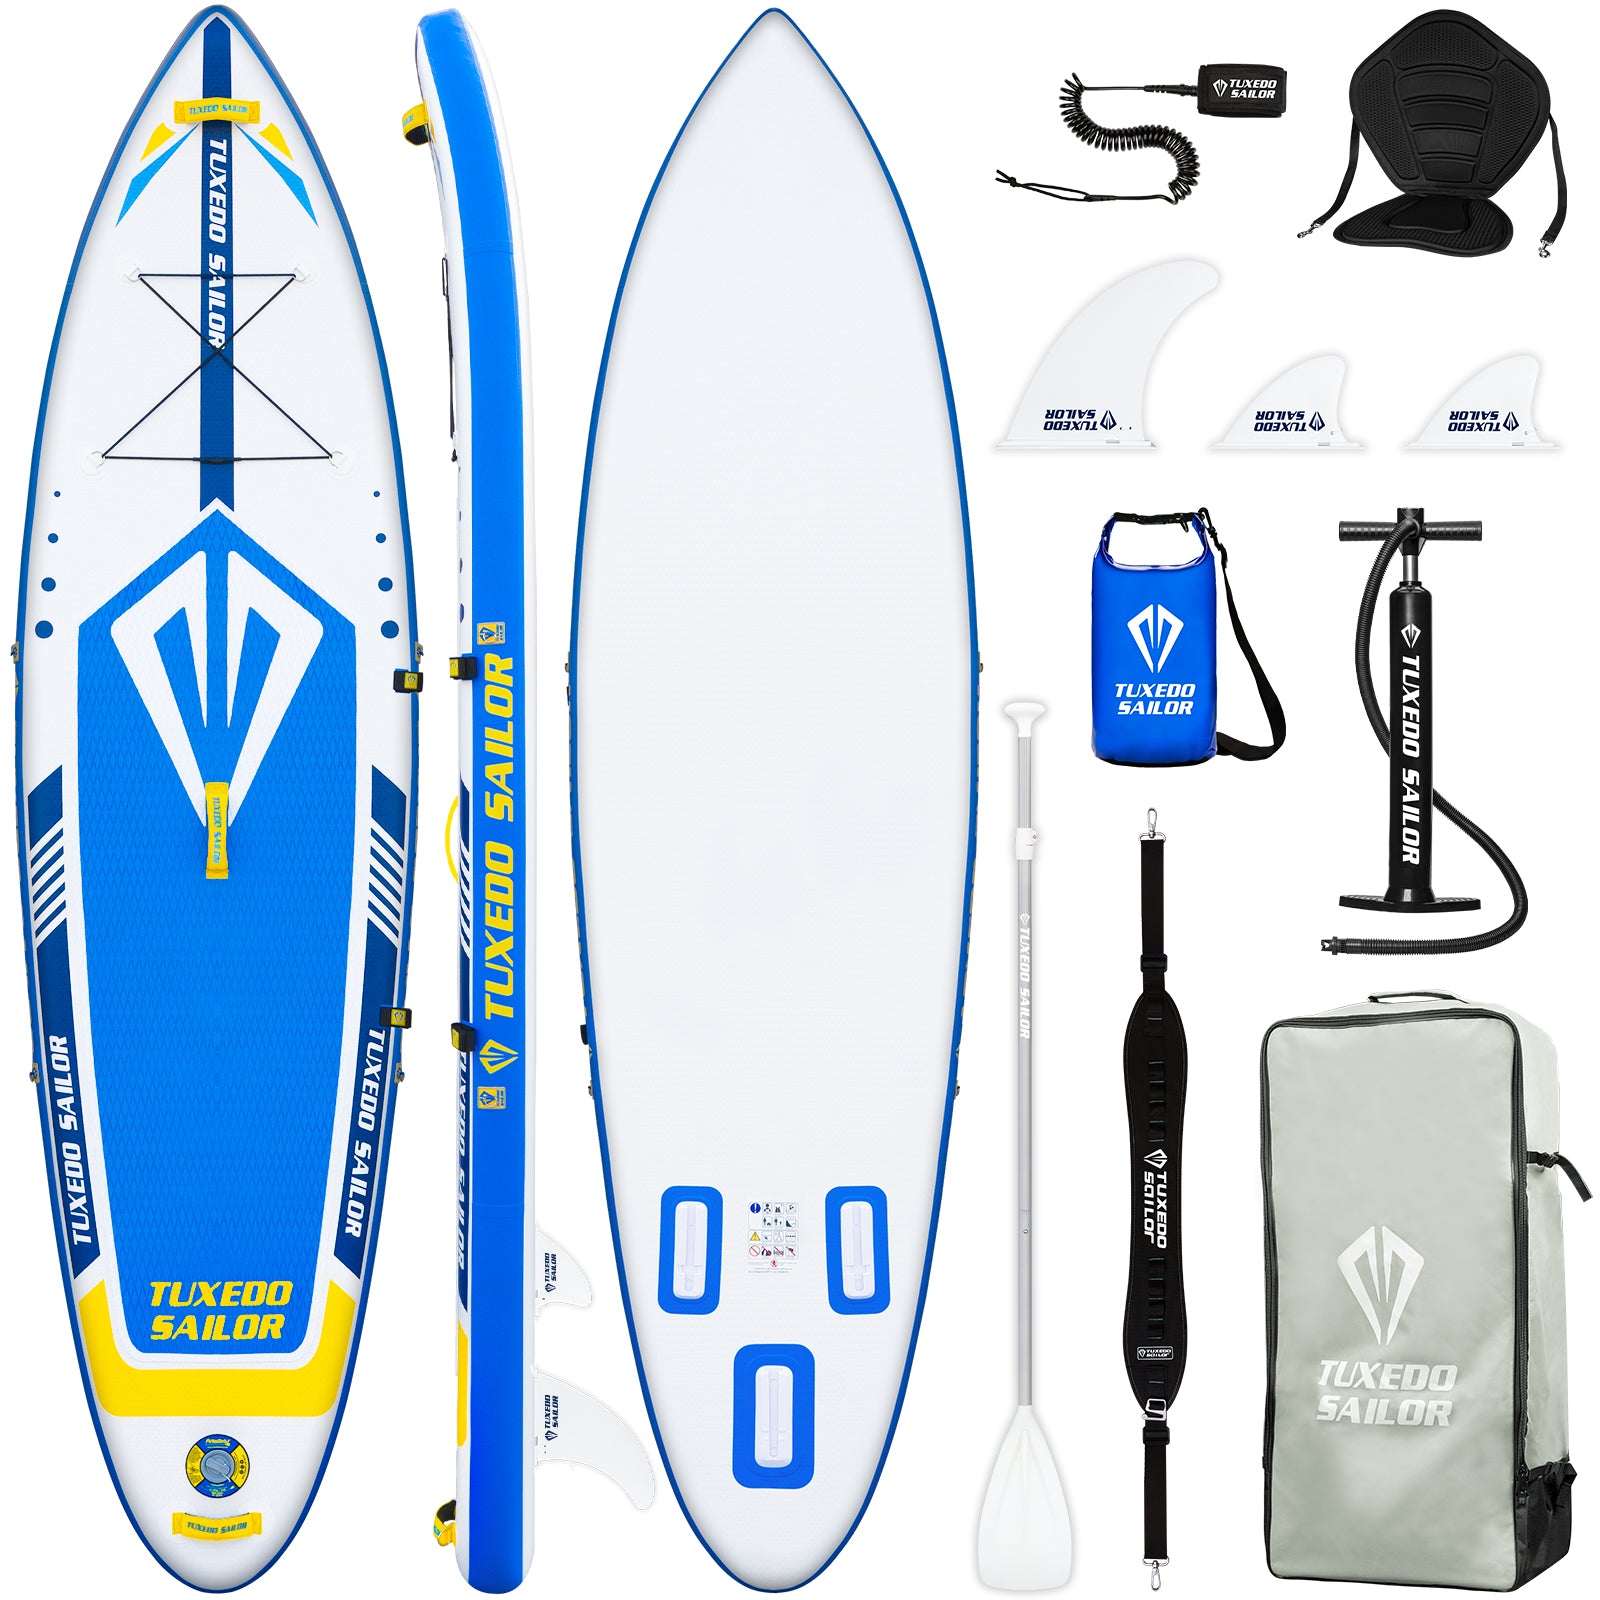 Tuxedo Sailor Emblem inflatable paddle board and accessories, including high pressure pump, waterproof dry bag and etc.